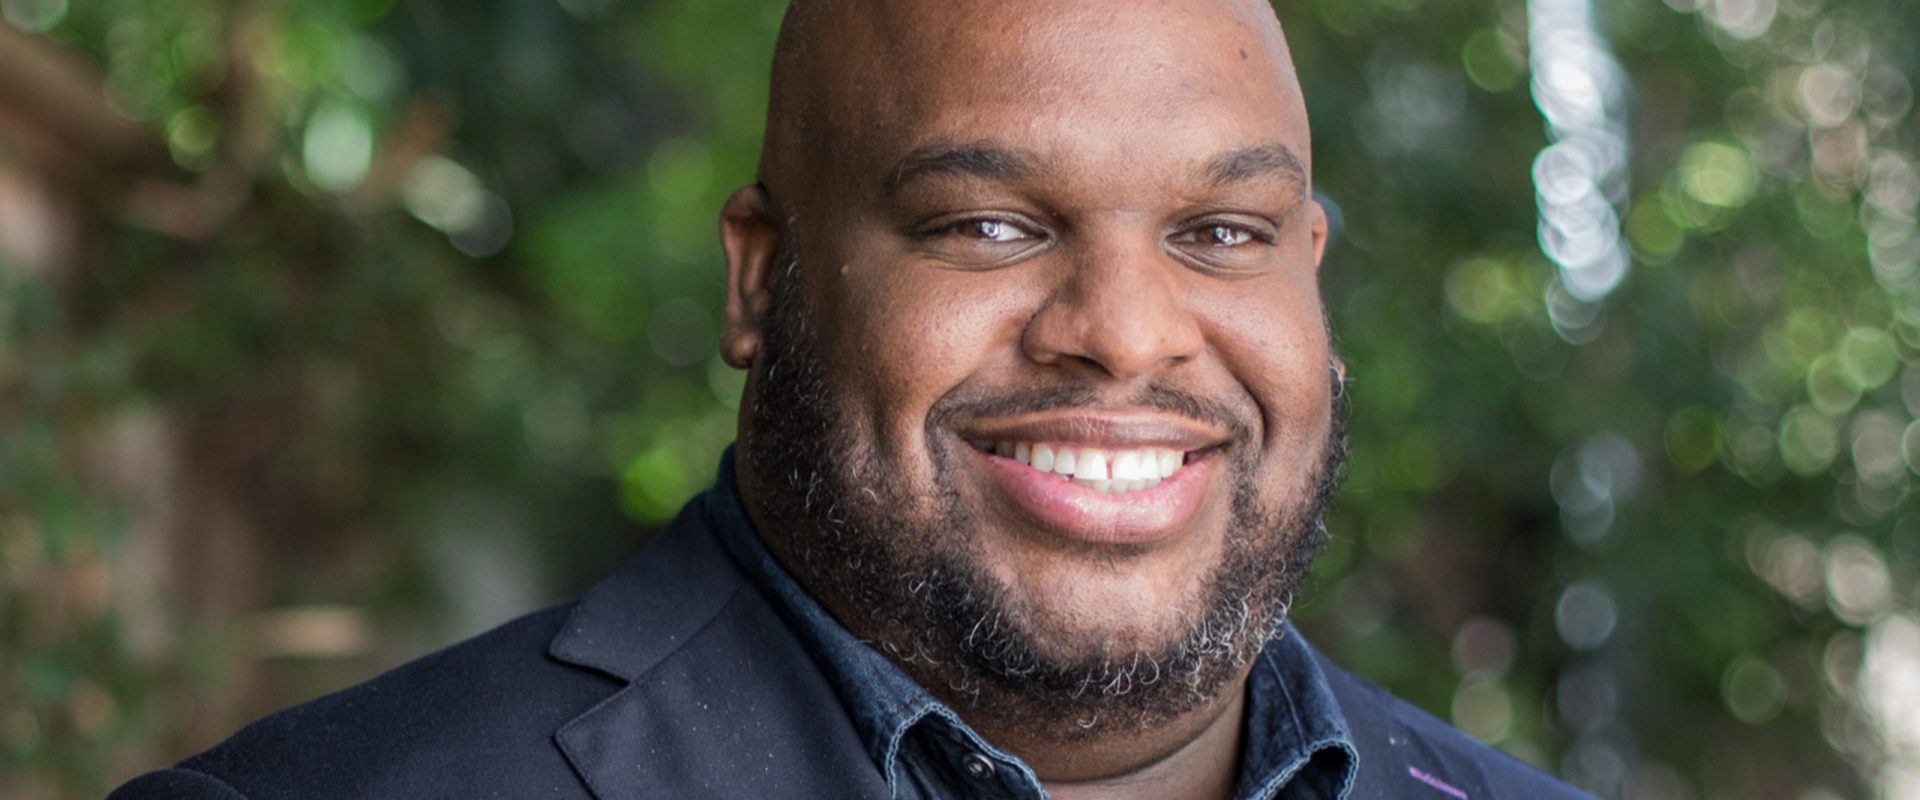 Exclusive: Reality Check with Pastor John Gray on his recent cheating scandal